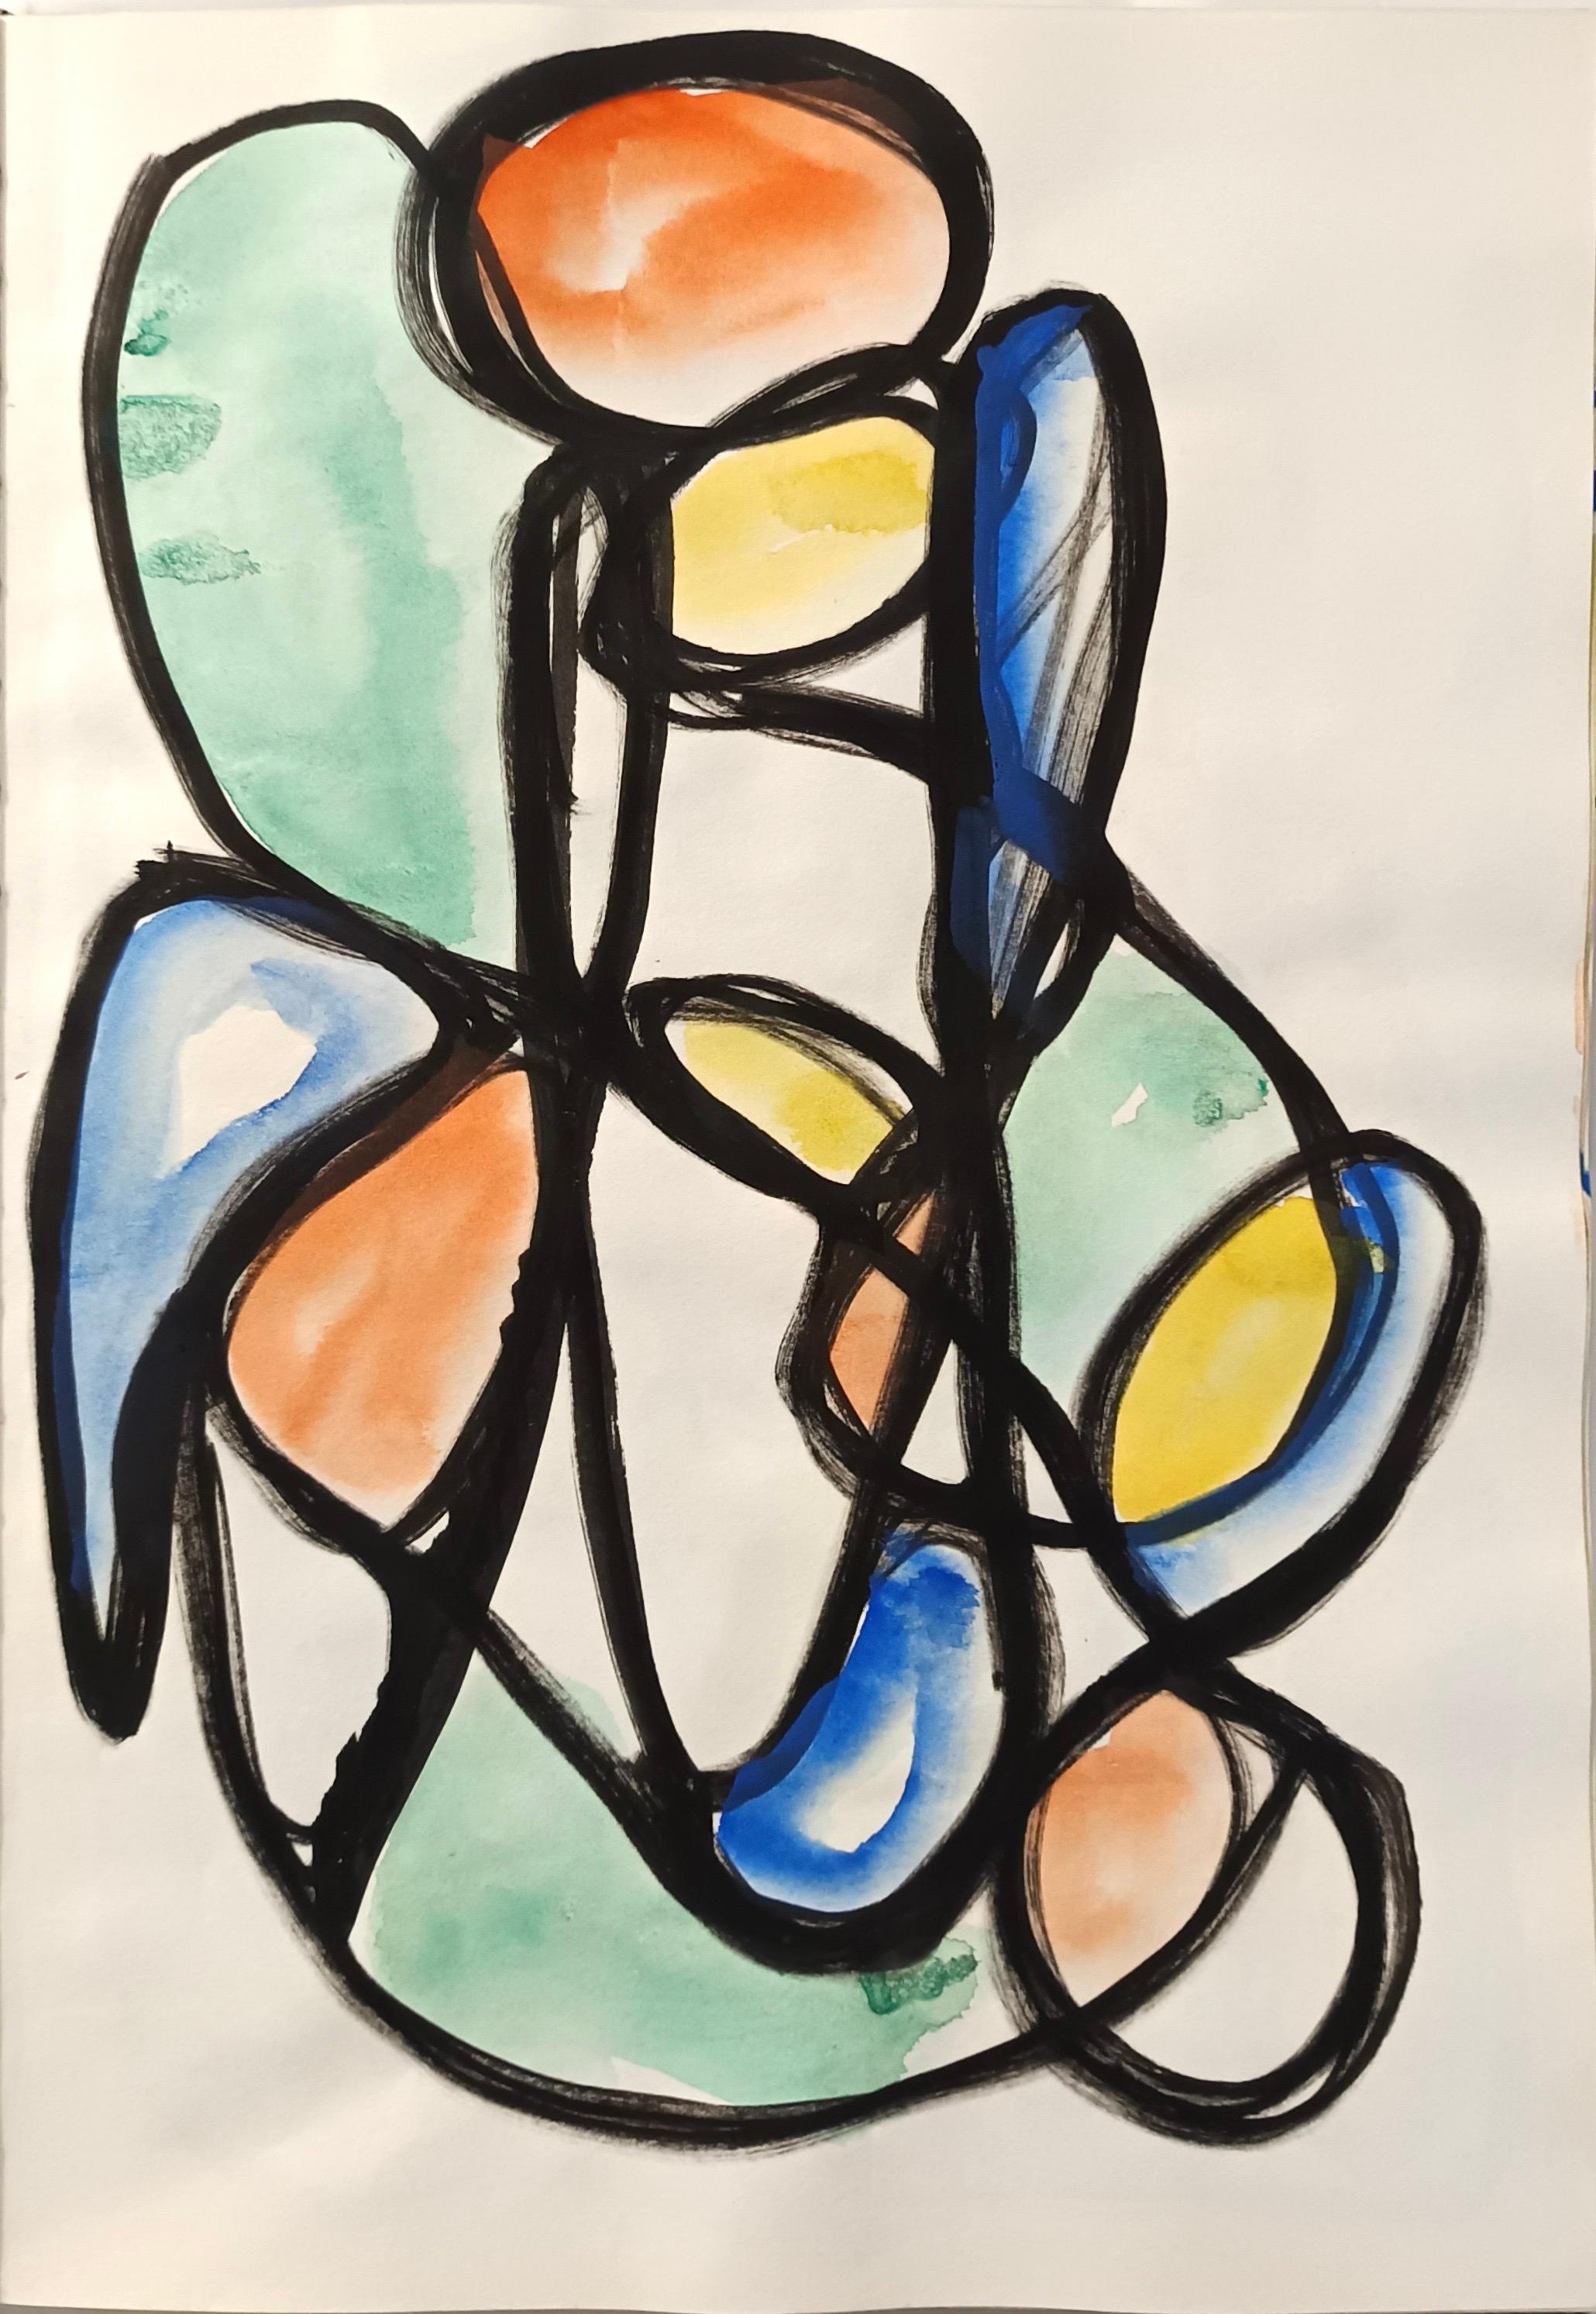 Enzio Wenk Abstract Drawing - "Composizione" by E. Wenk, 2020-21 - Watercolor and Acrylic Paint, Abstract